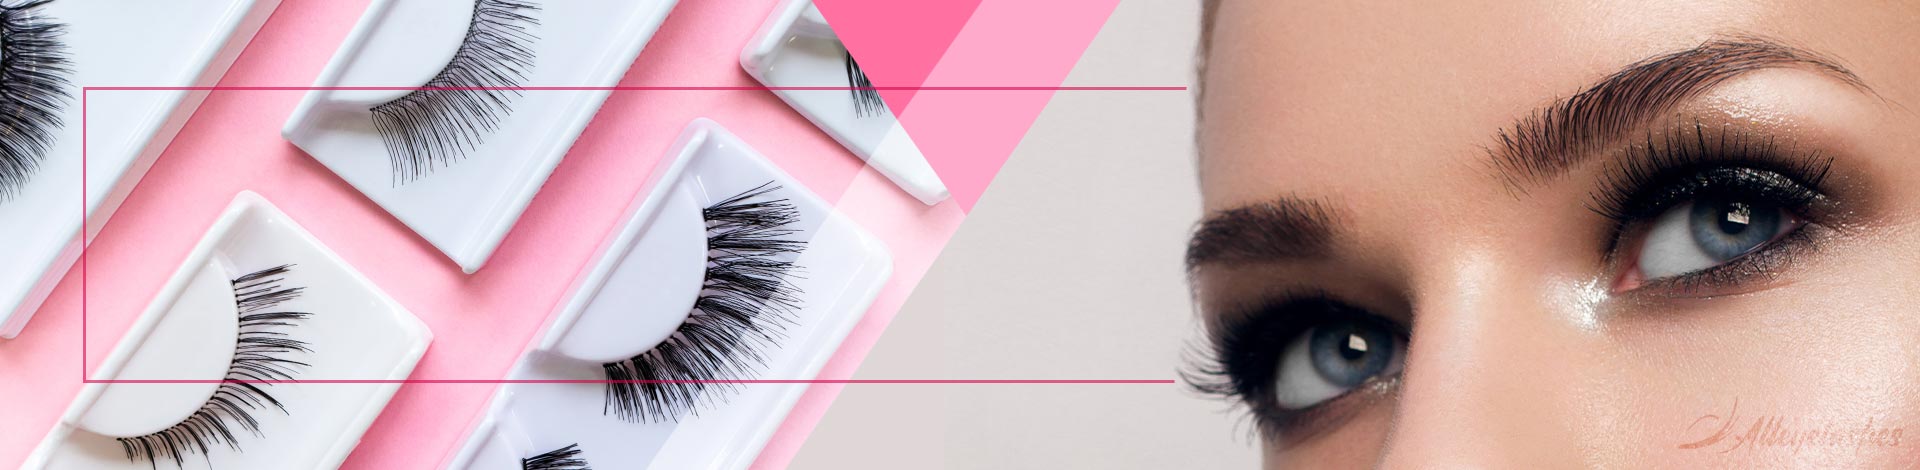 Types of False Eyelashes: What's In Vogue